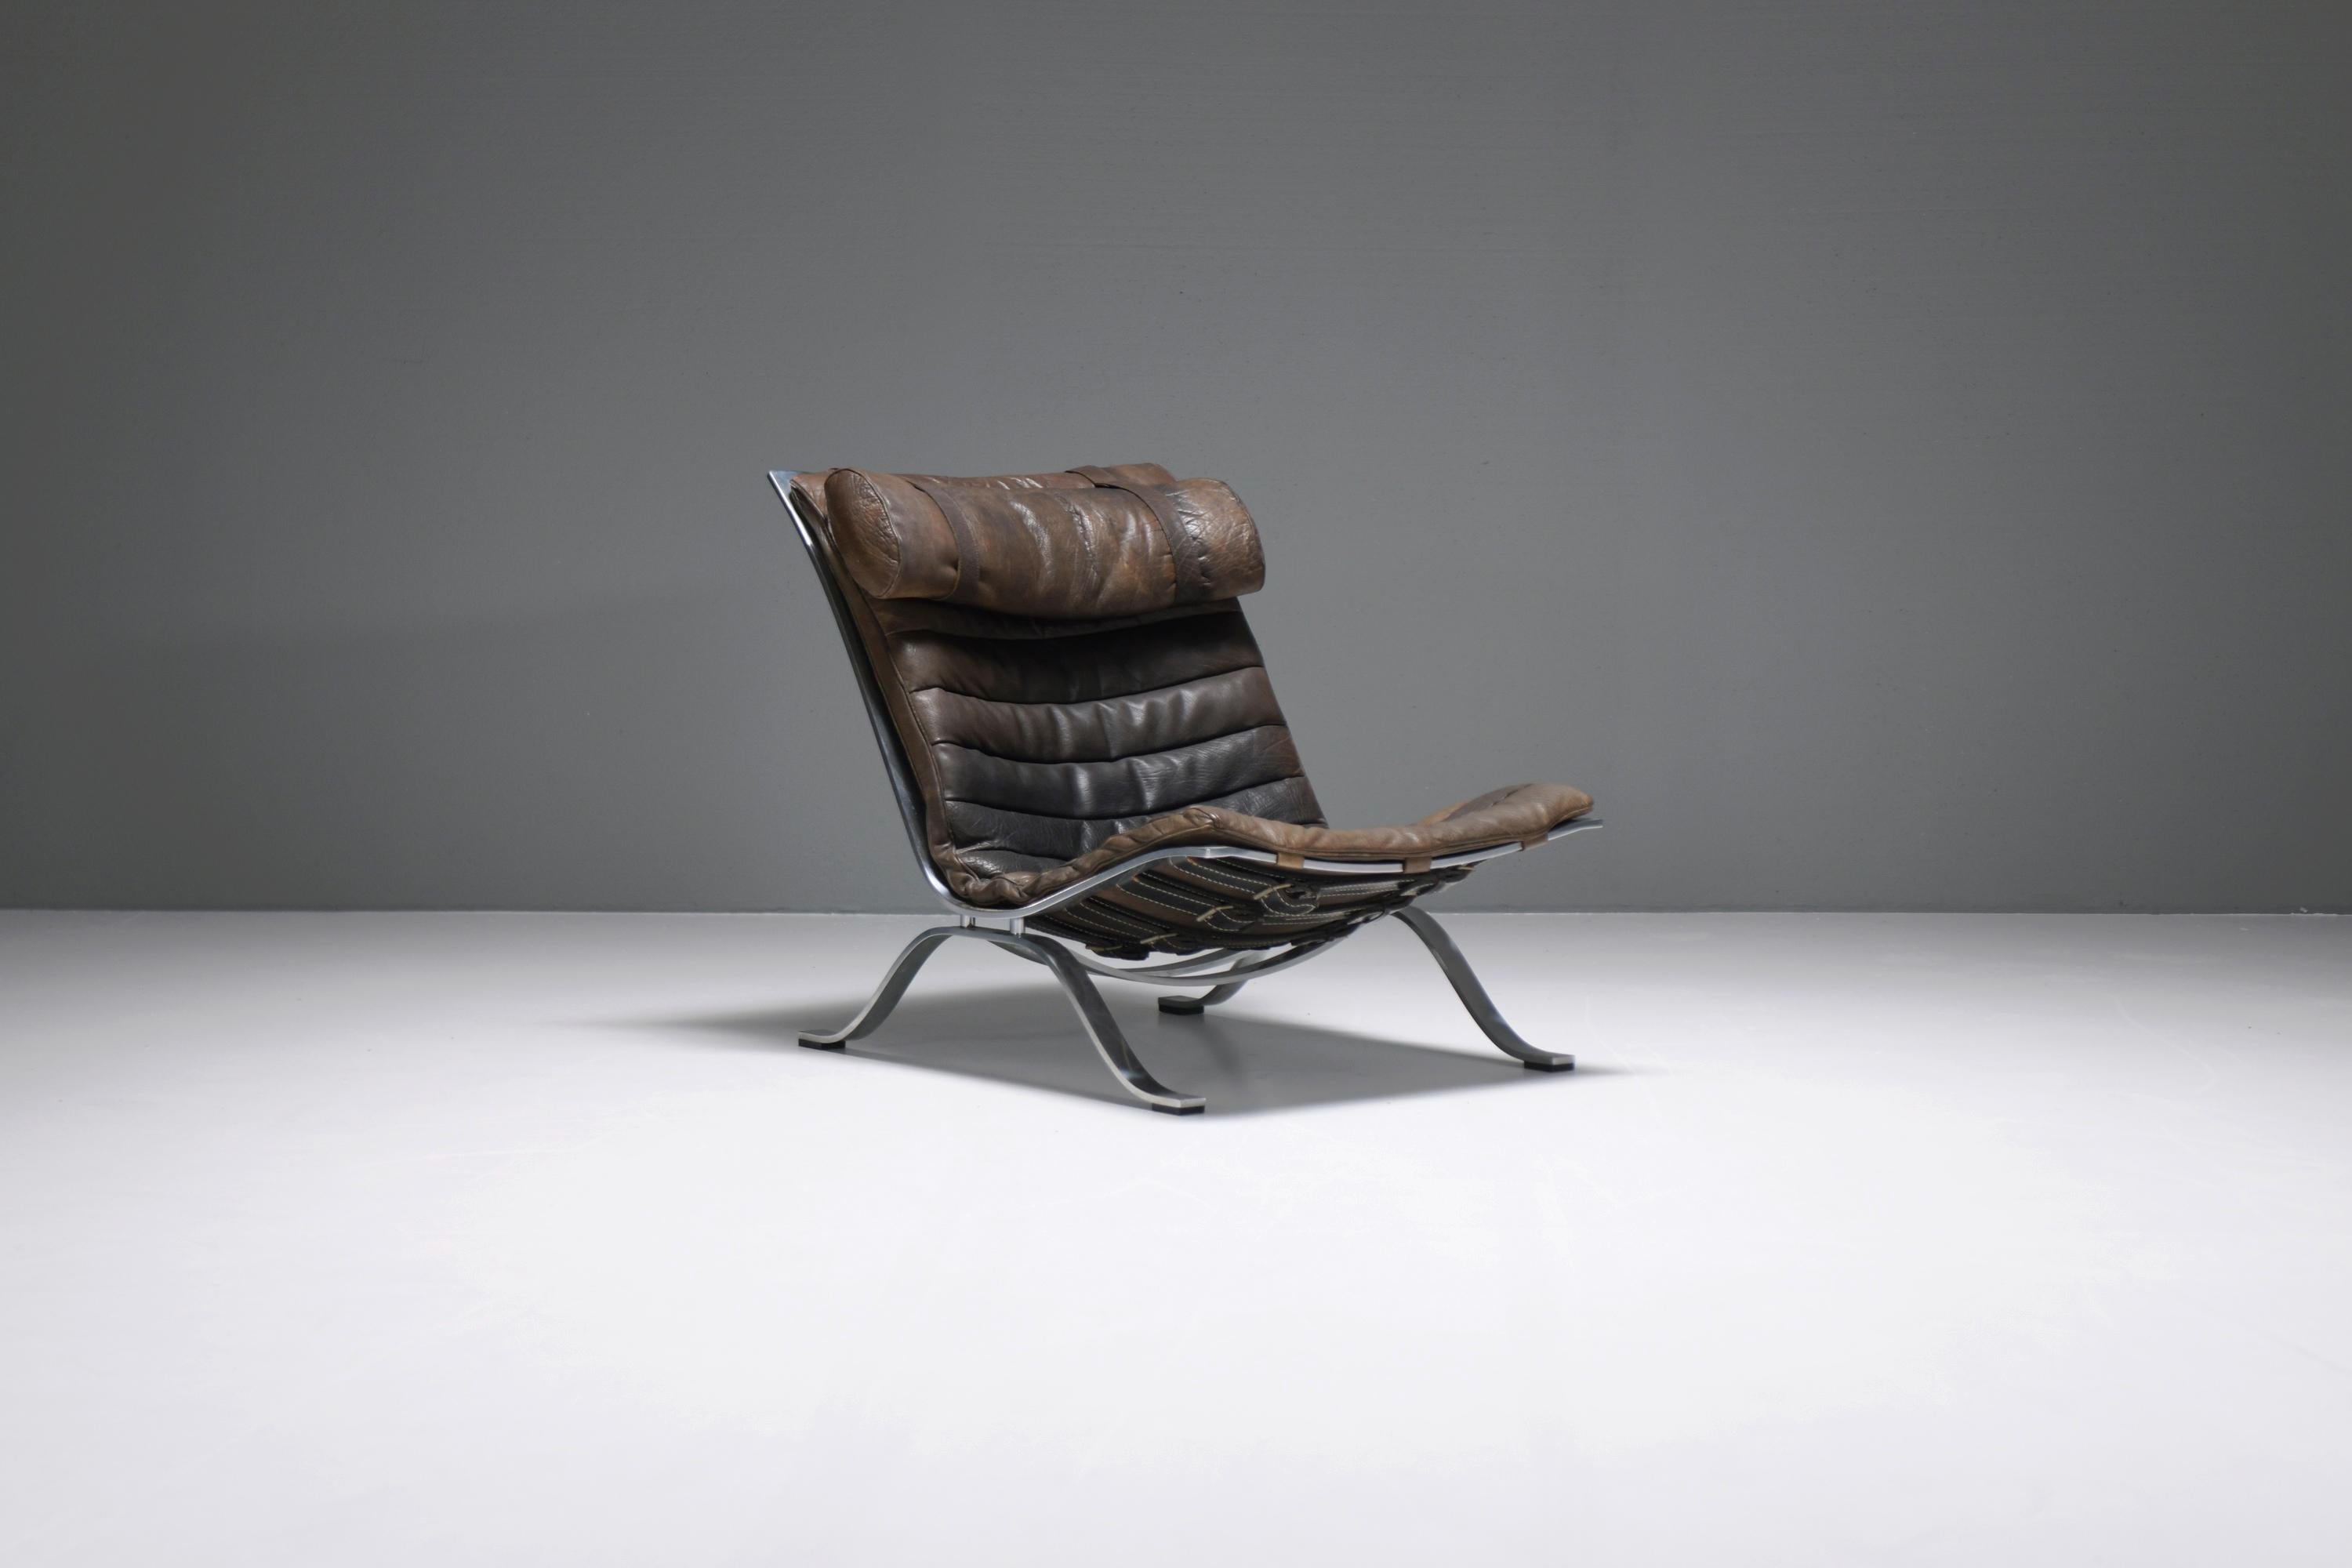 tunning leather on this ARI lounge chair.  What a patina!! 
Designed by Are Norell for Möbel AB.

The 'Ari' became award winning in the beginning of the seventies when it was ascribed the 